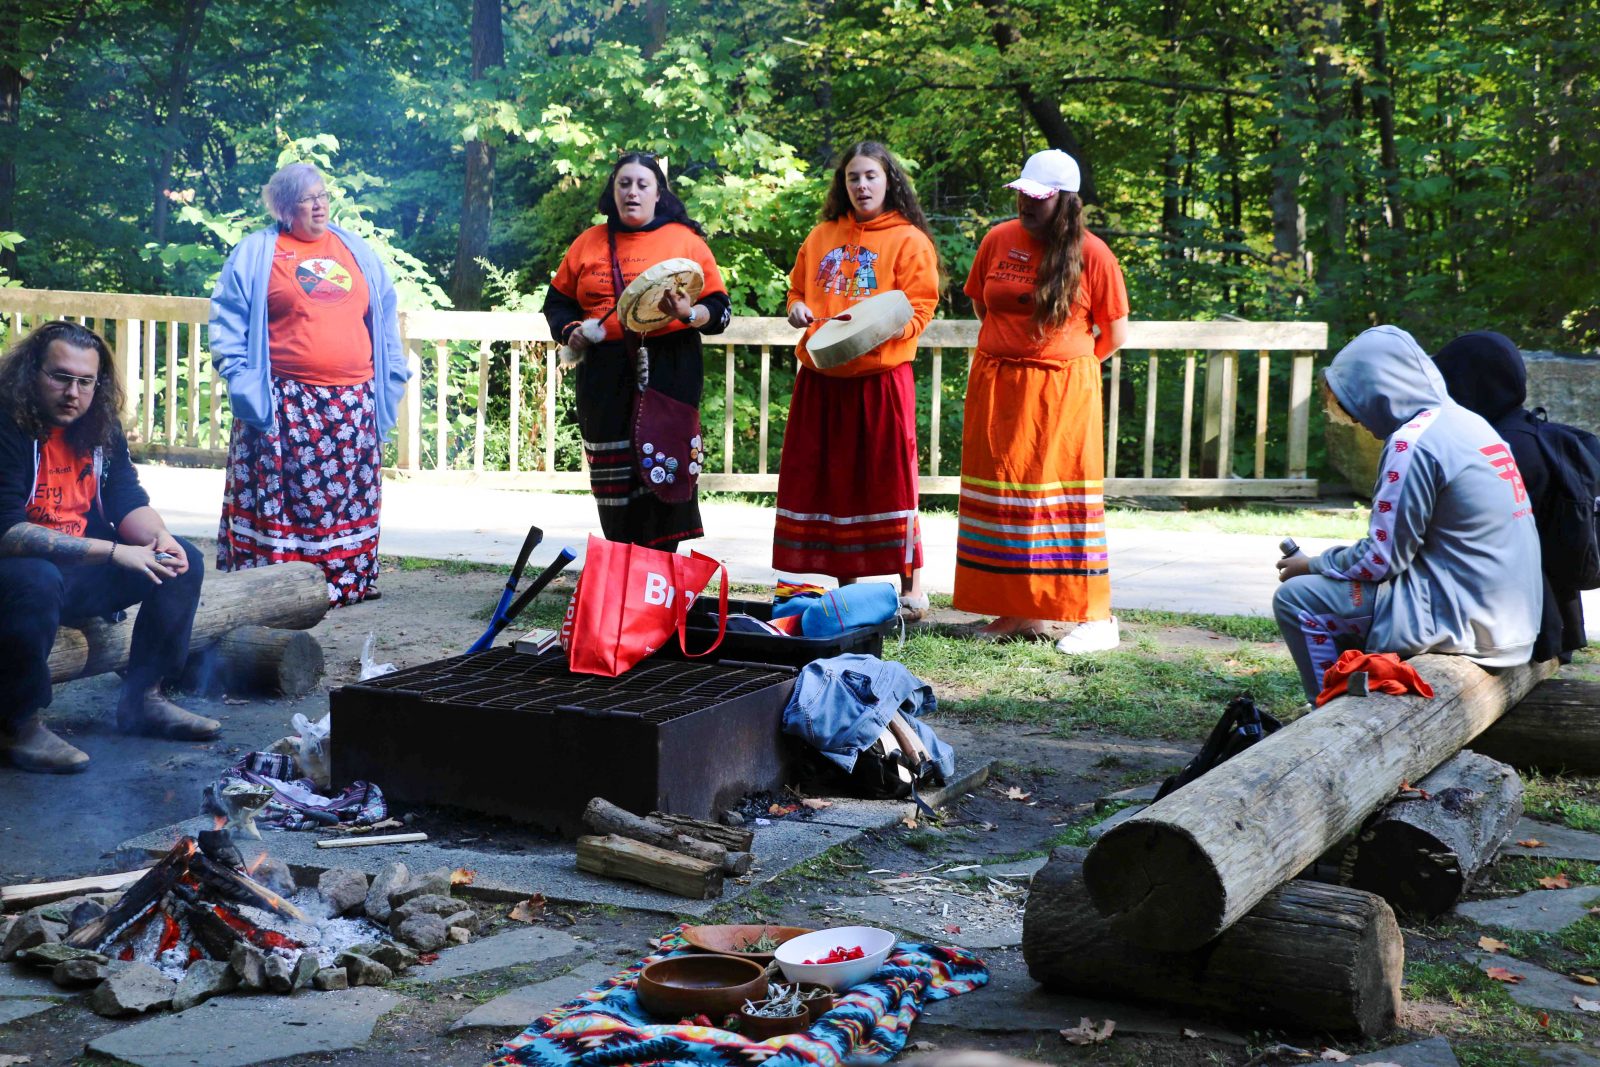 A group of people participate in a ceremony beside a firepit.